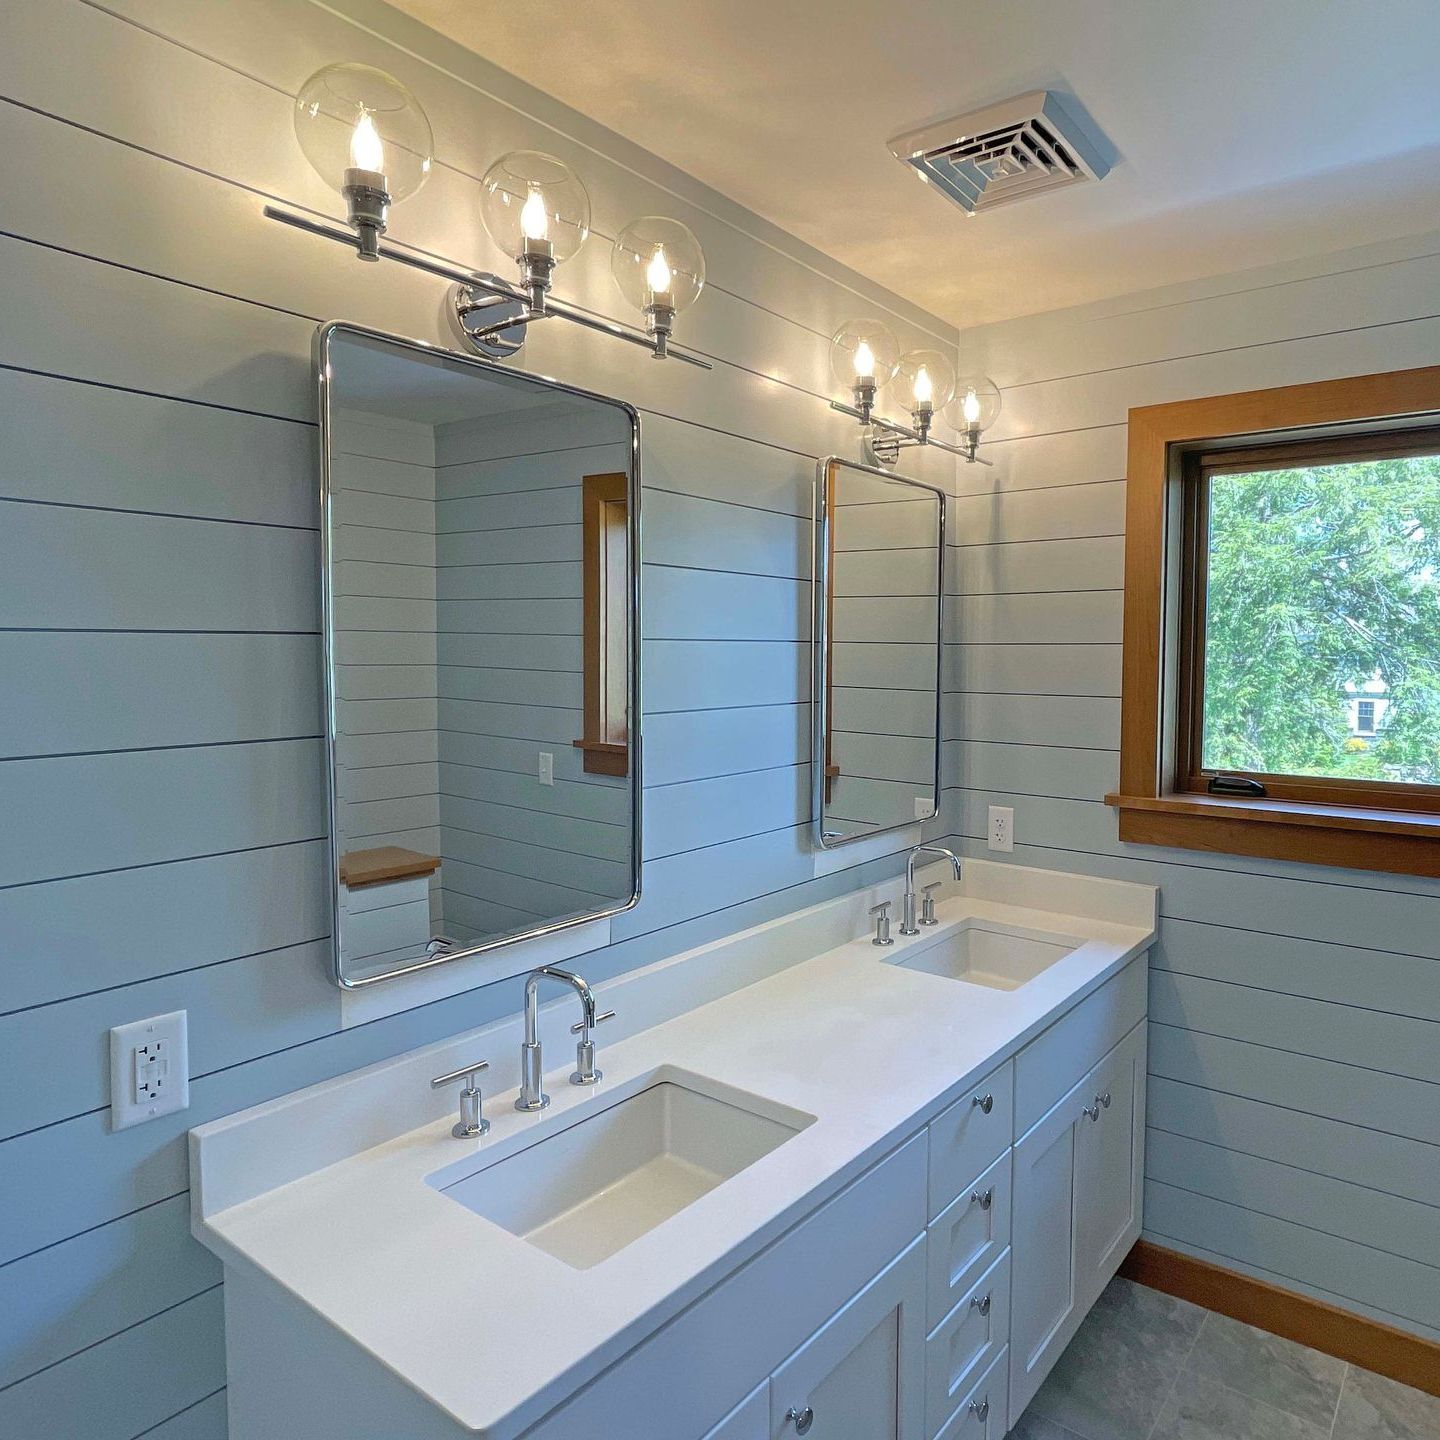 A bathroom with two sinks a mirror and a window